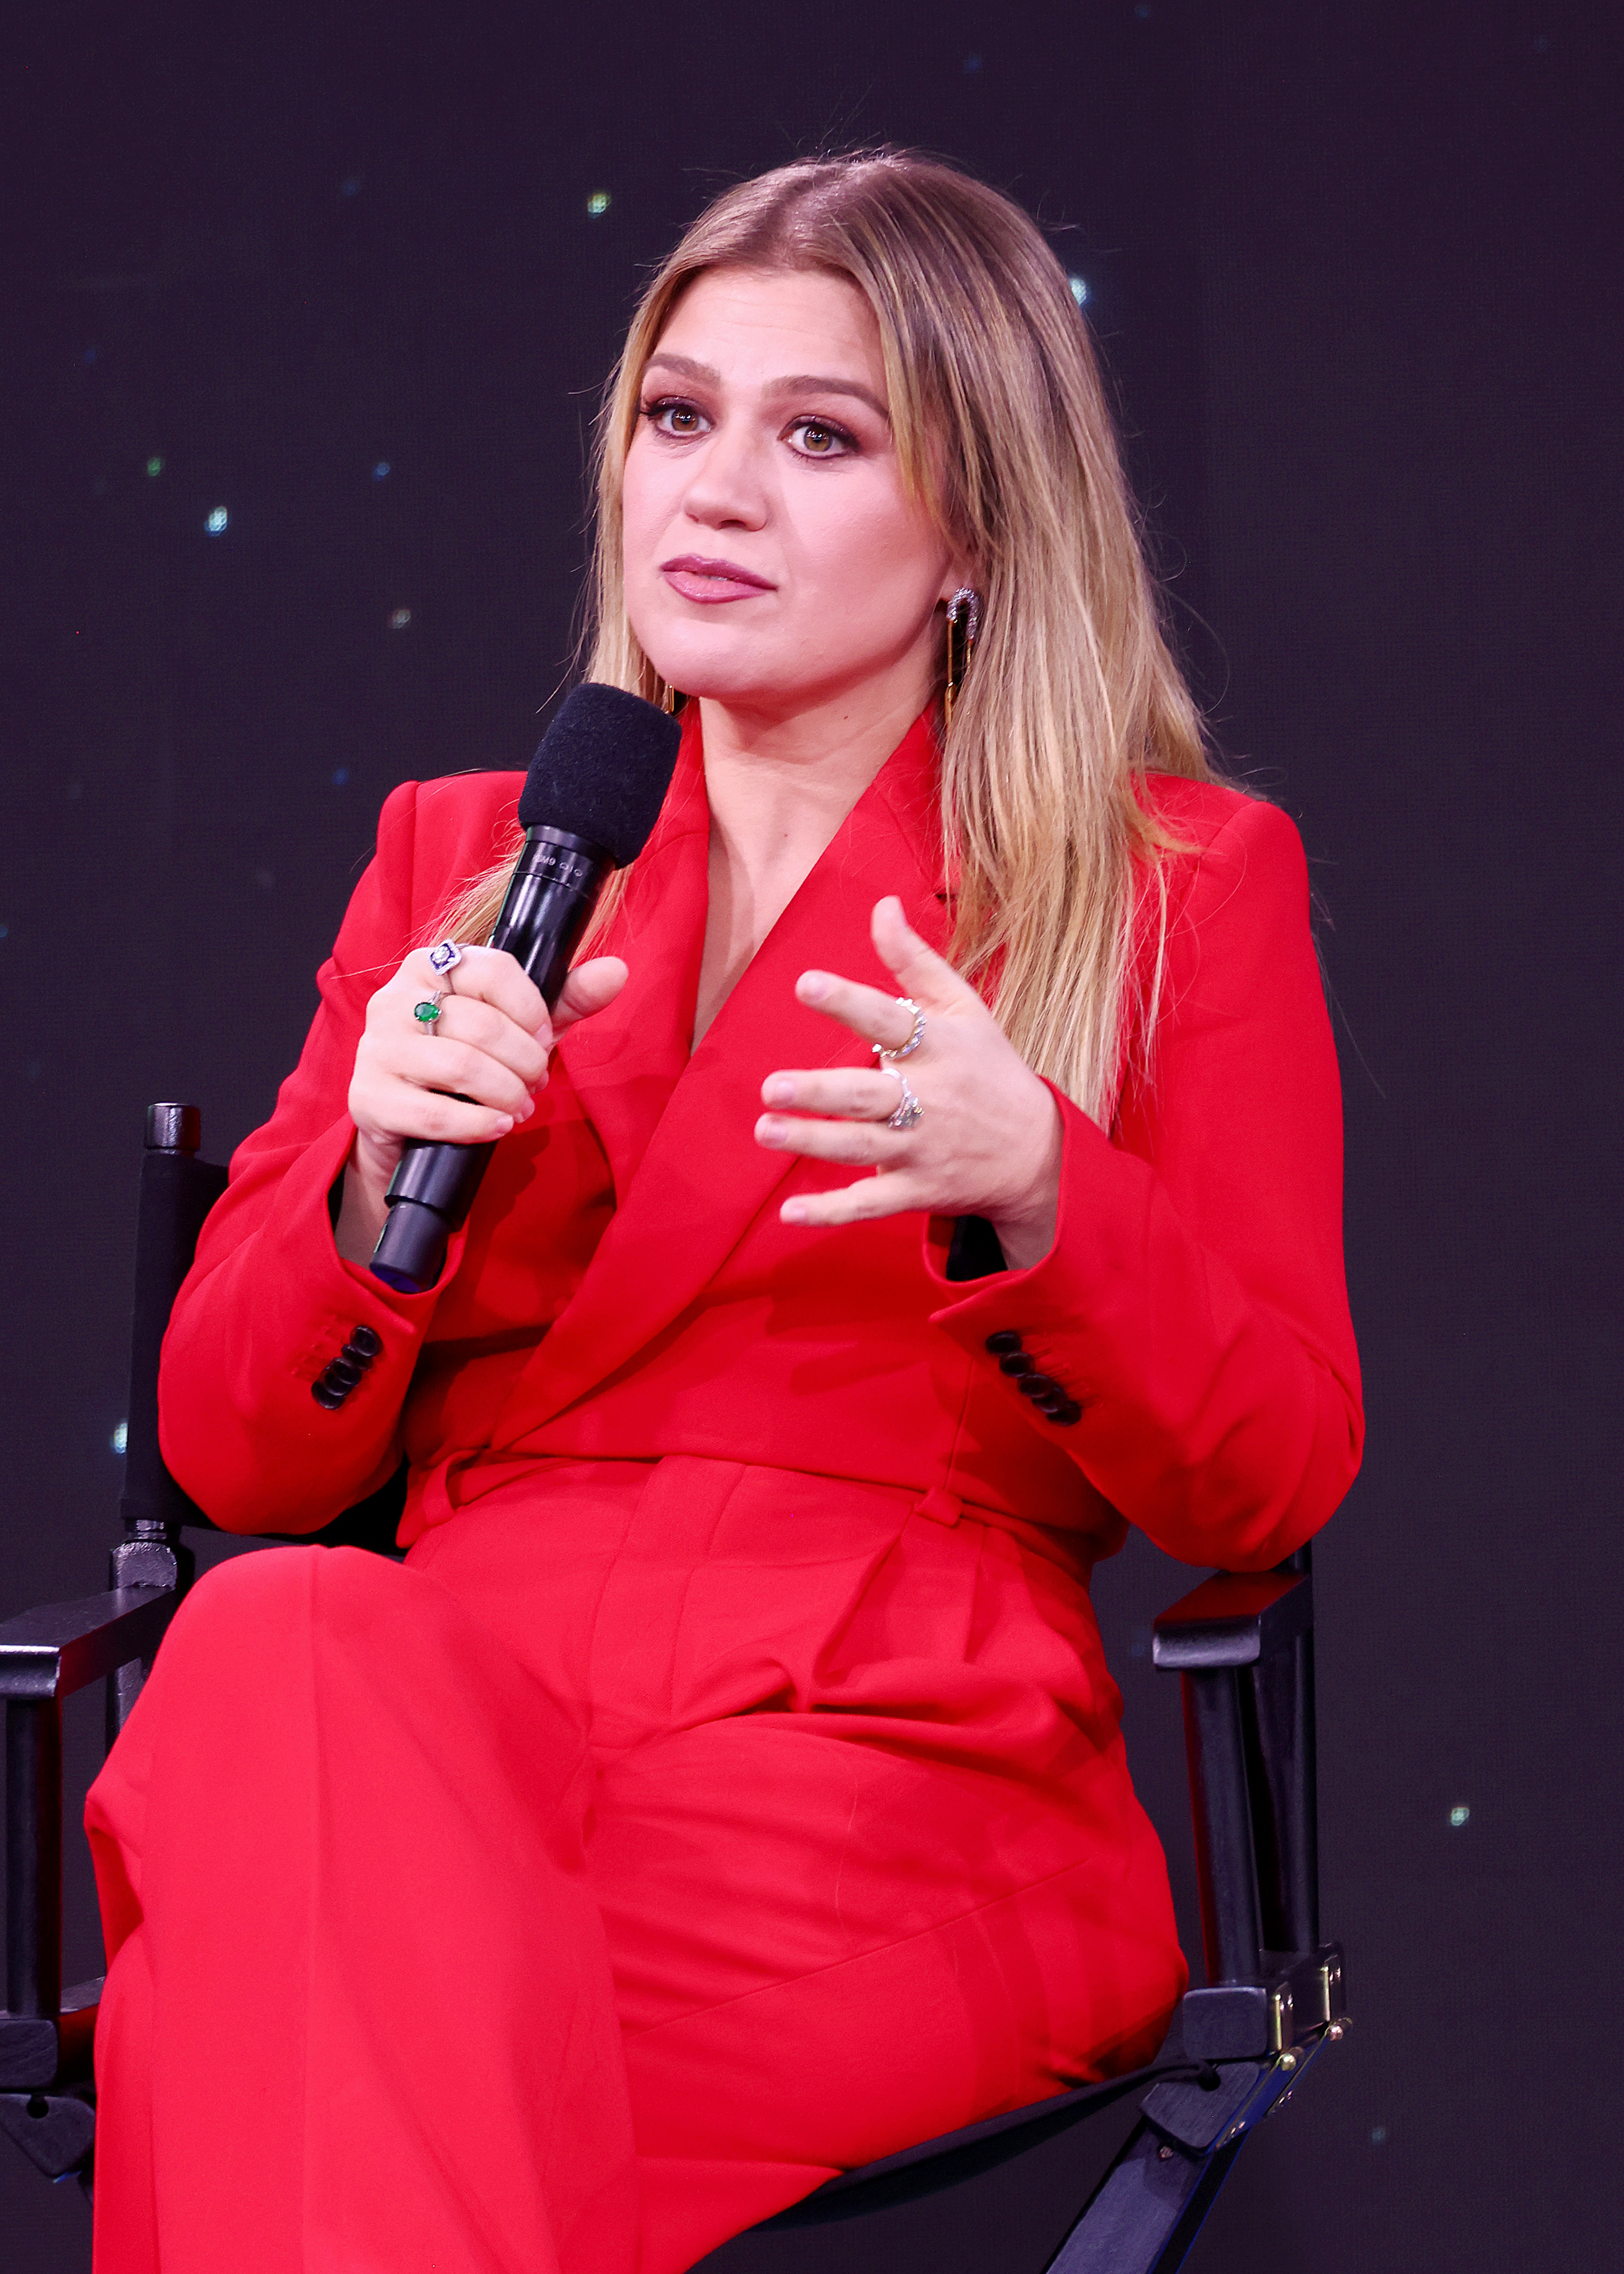 Close-up of Kelly sitting and holding a microphone